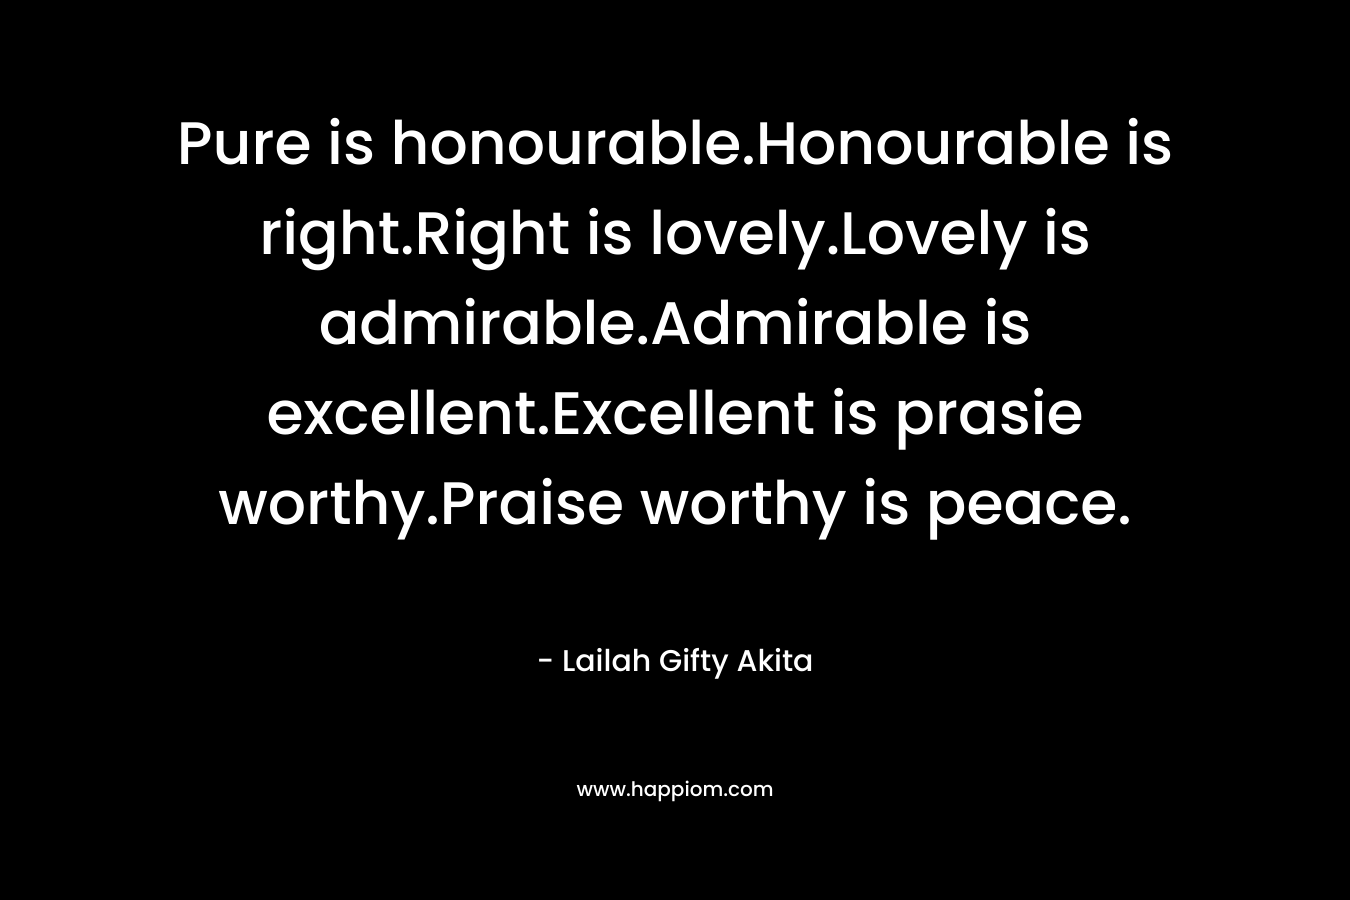 Pure is honourable.Honourable is right.Right is lovely.Lovely is admirable.Admirable is excellent.Excellent is prasie worthy.Praise worthy is peace.